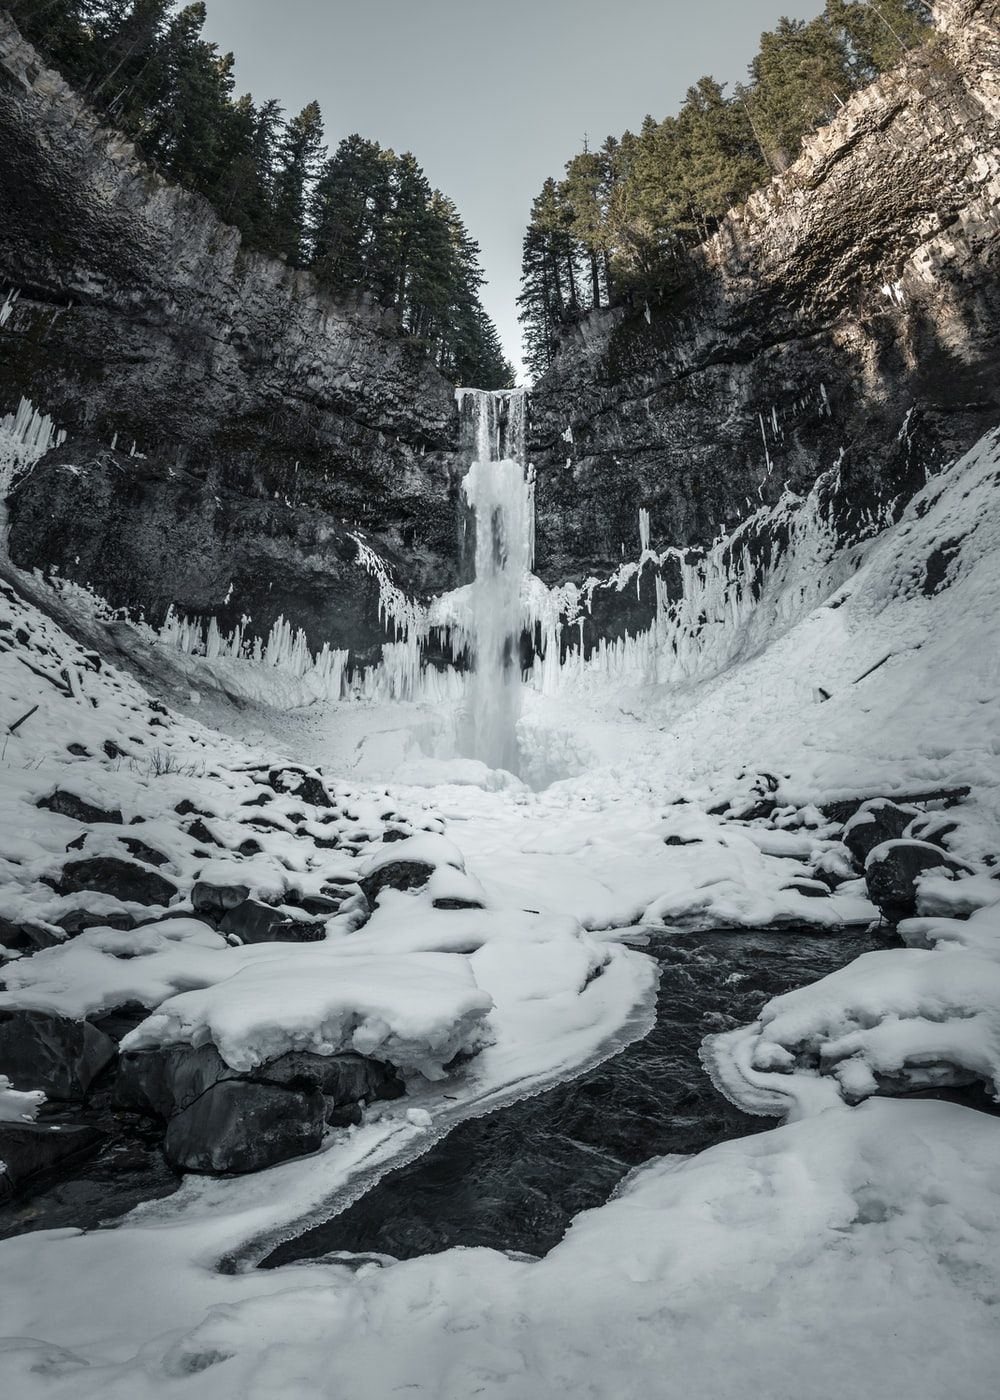 Frozen Waterfall Picture. Download .com